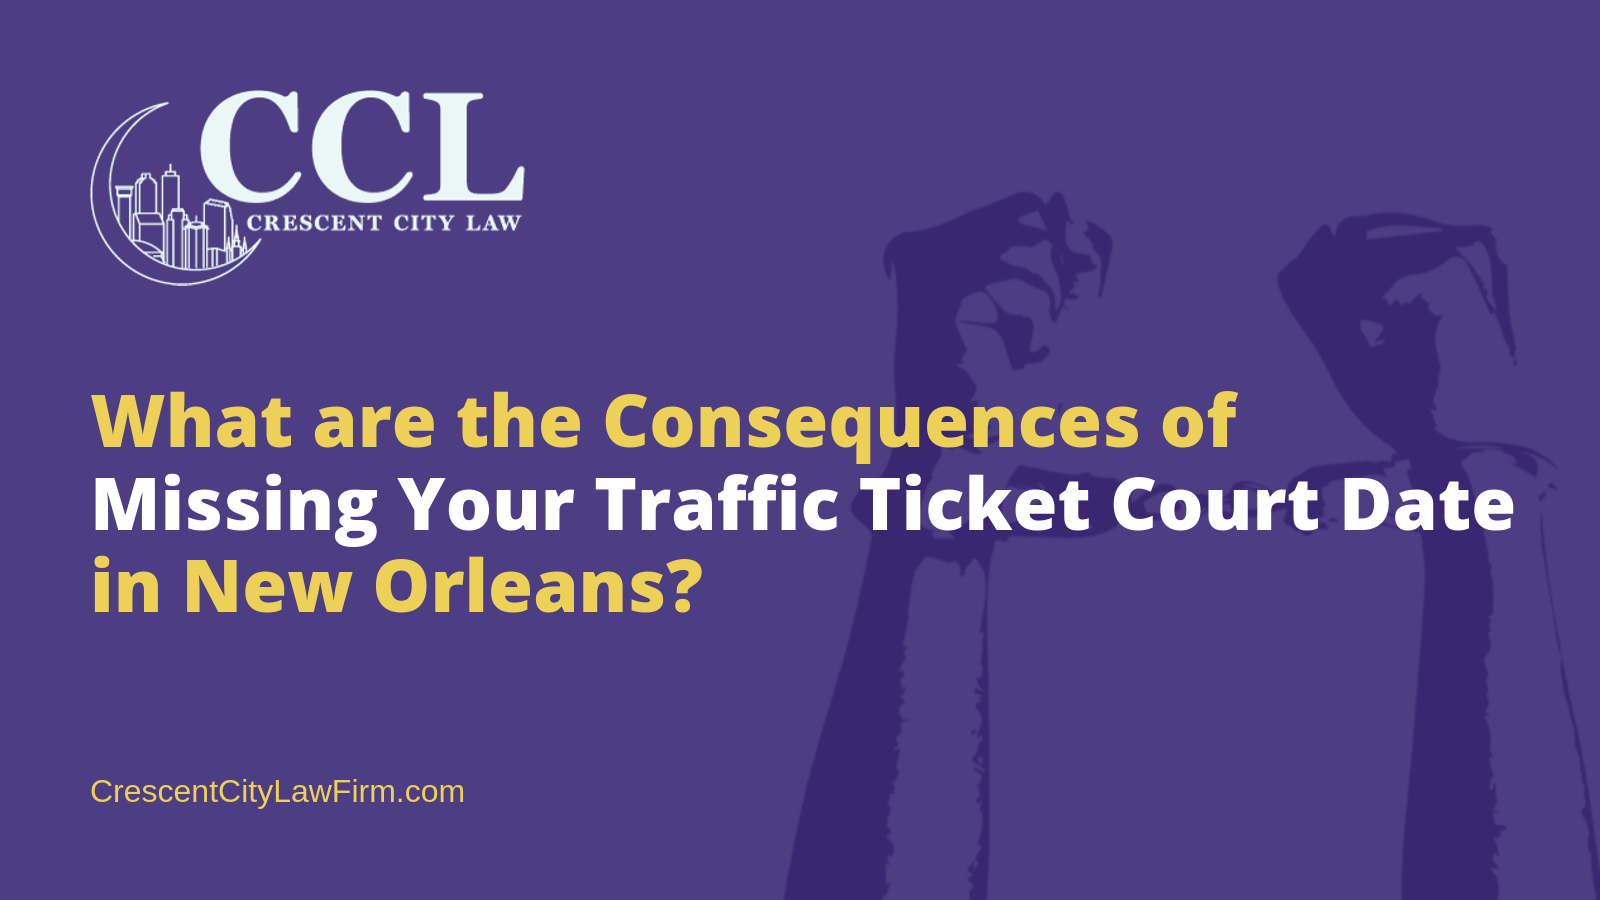 Consequences for Missing Your Traffic Ticket Court Date in New Orleans